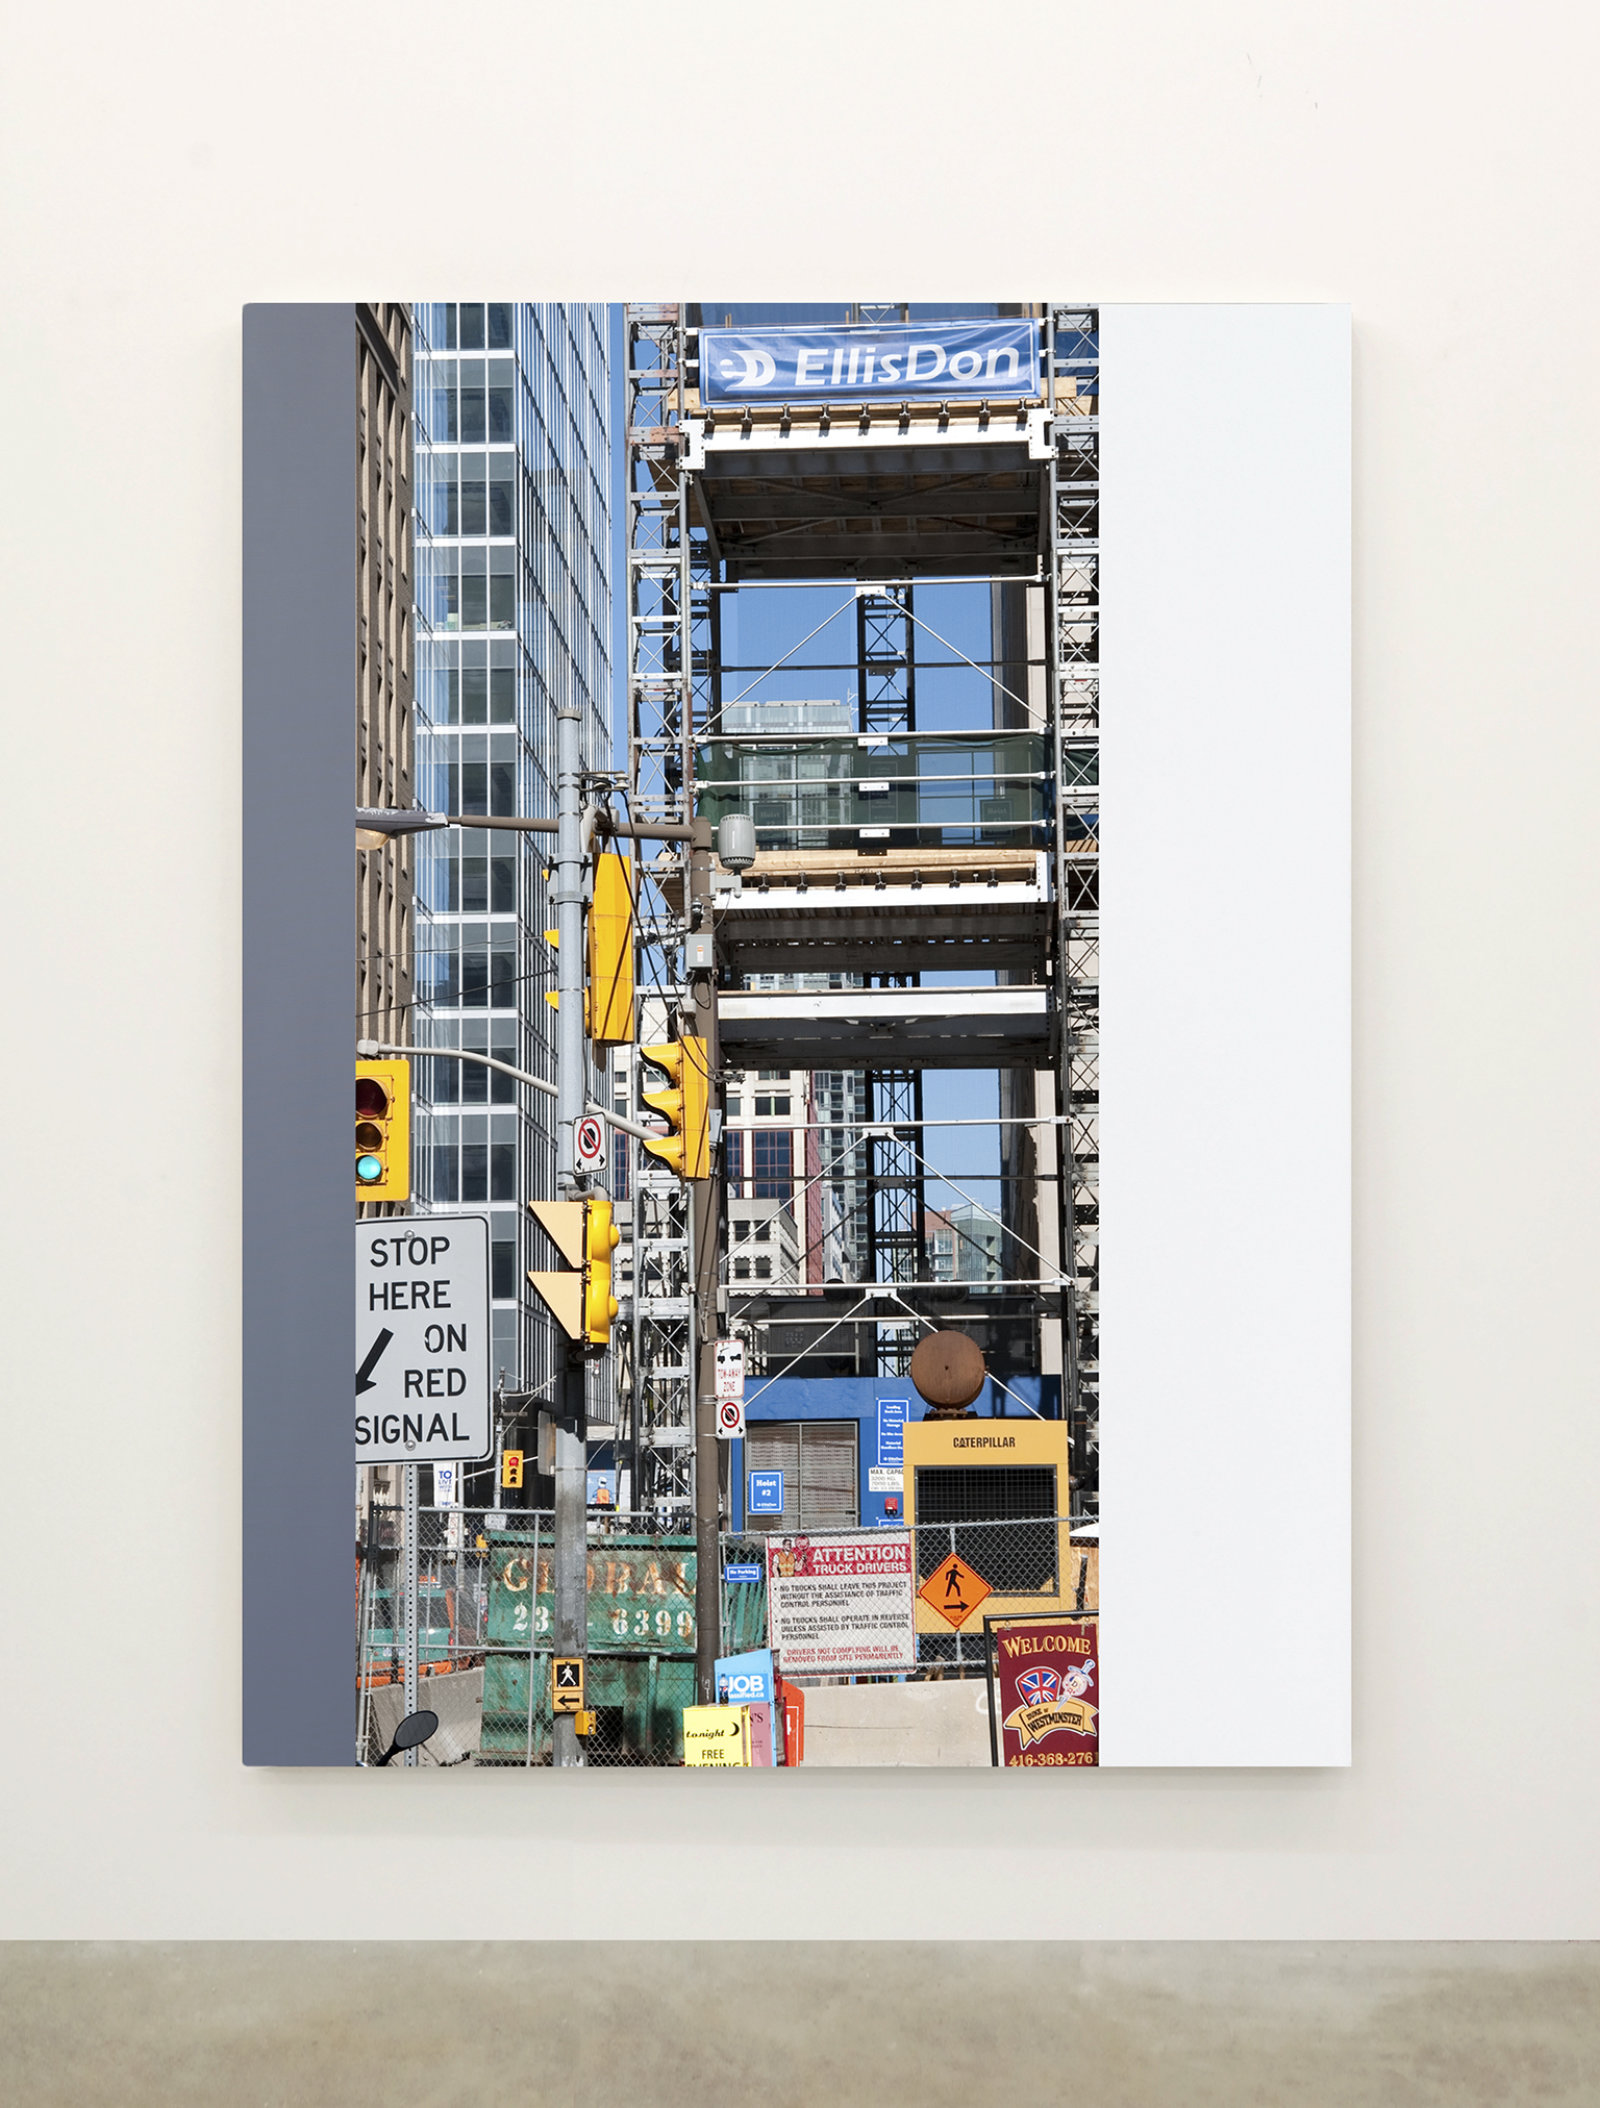 Ian Wallace, Abstract Painting II (The Financial District), 2010, 12 photolaminate with acrylic on canvas panels, each 96 x 72 in. (244 x 183 cm)